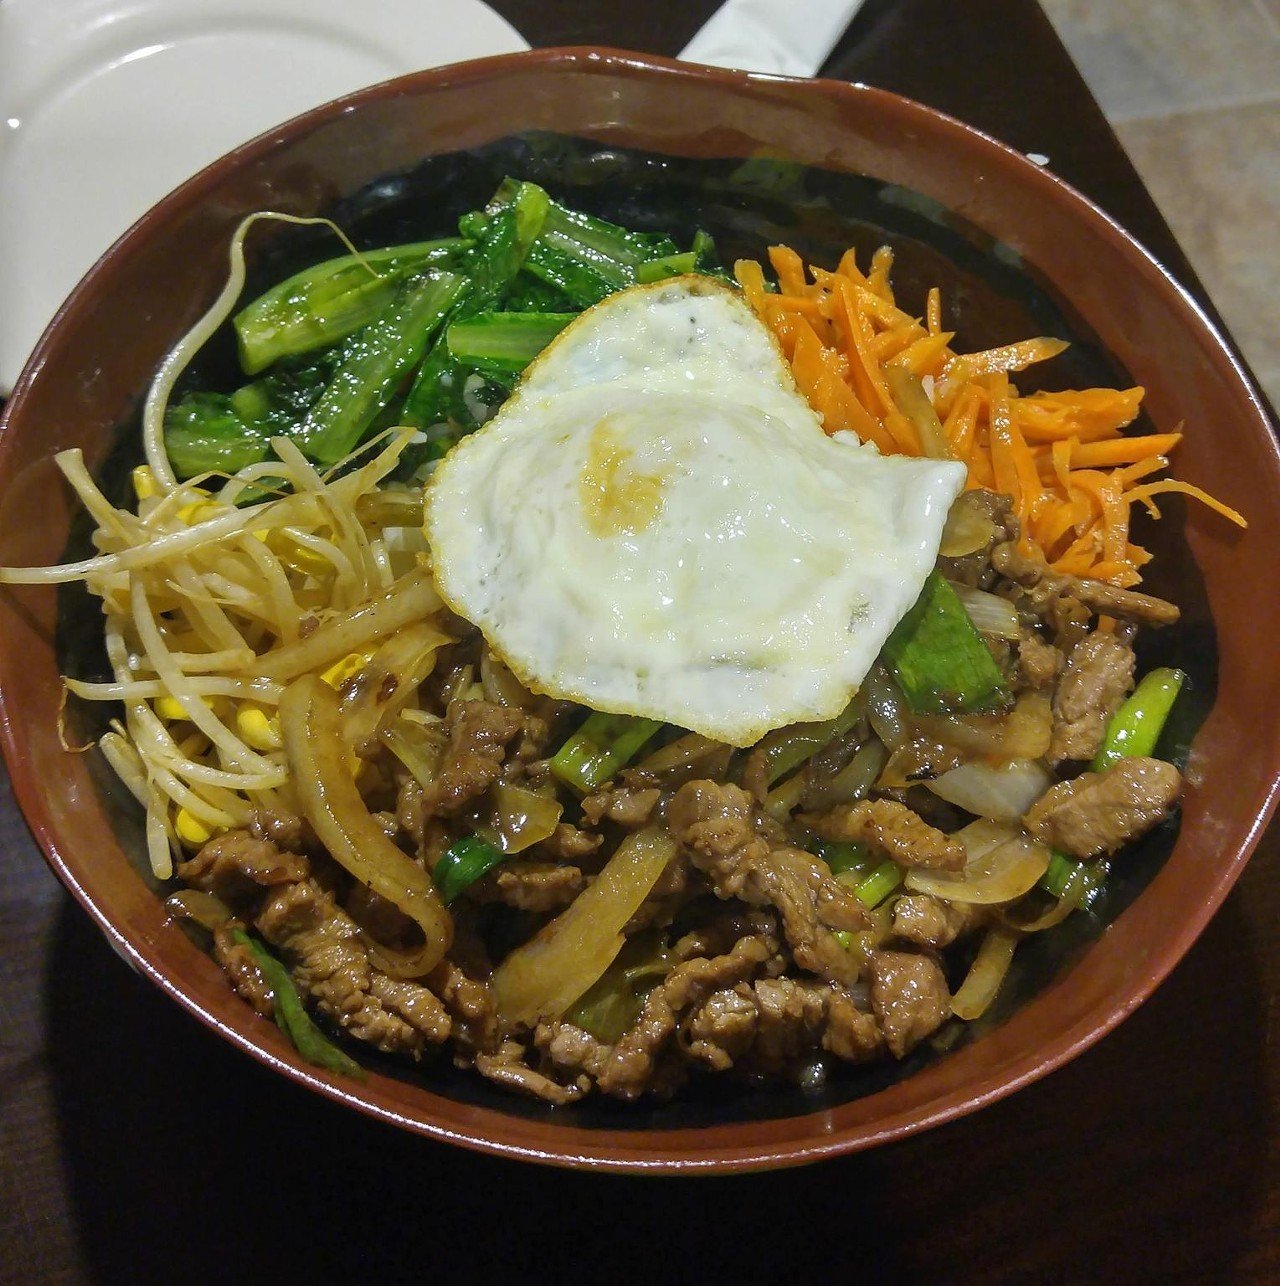 Rice Bowl
3114 Grantline Rd., New Albany, IN  
A homey atmosphere with Korean favorites and great customer service.
Photo via Rice Bowl